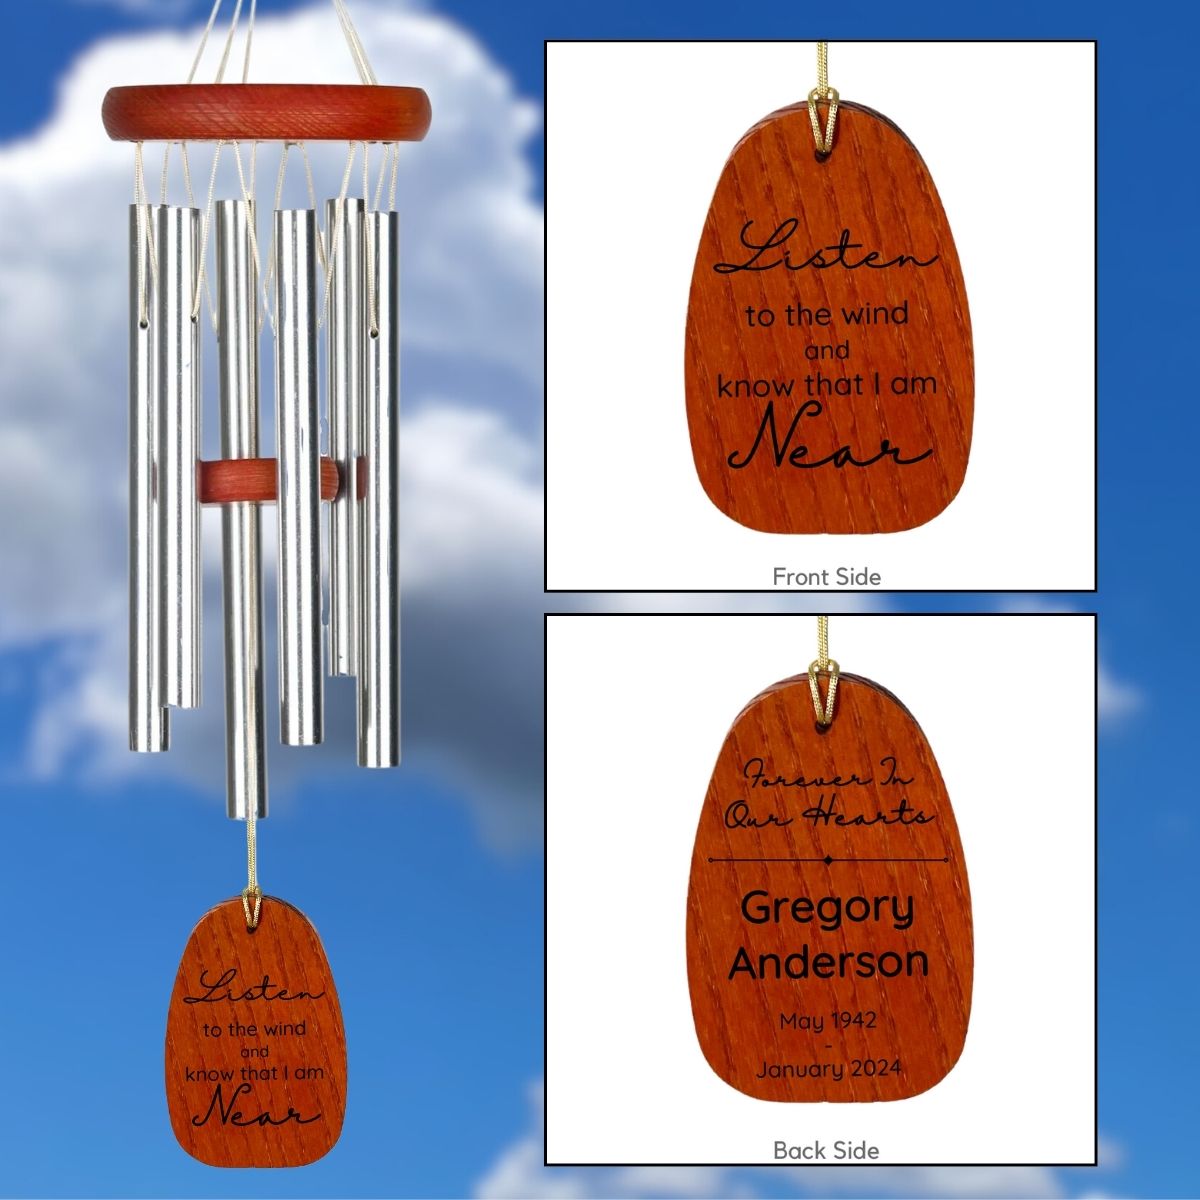 Amazing Grace Silver 16 Inch Wind Chime - Listen to the Wind